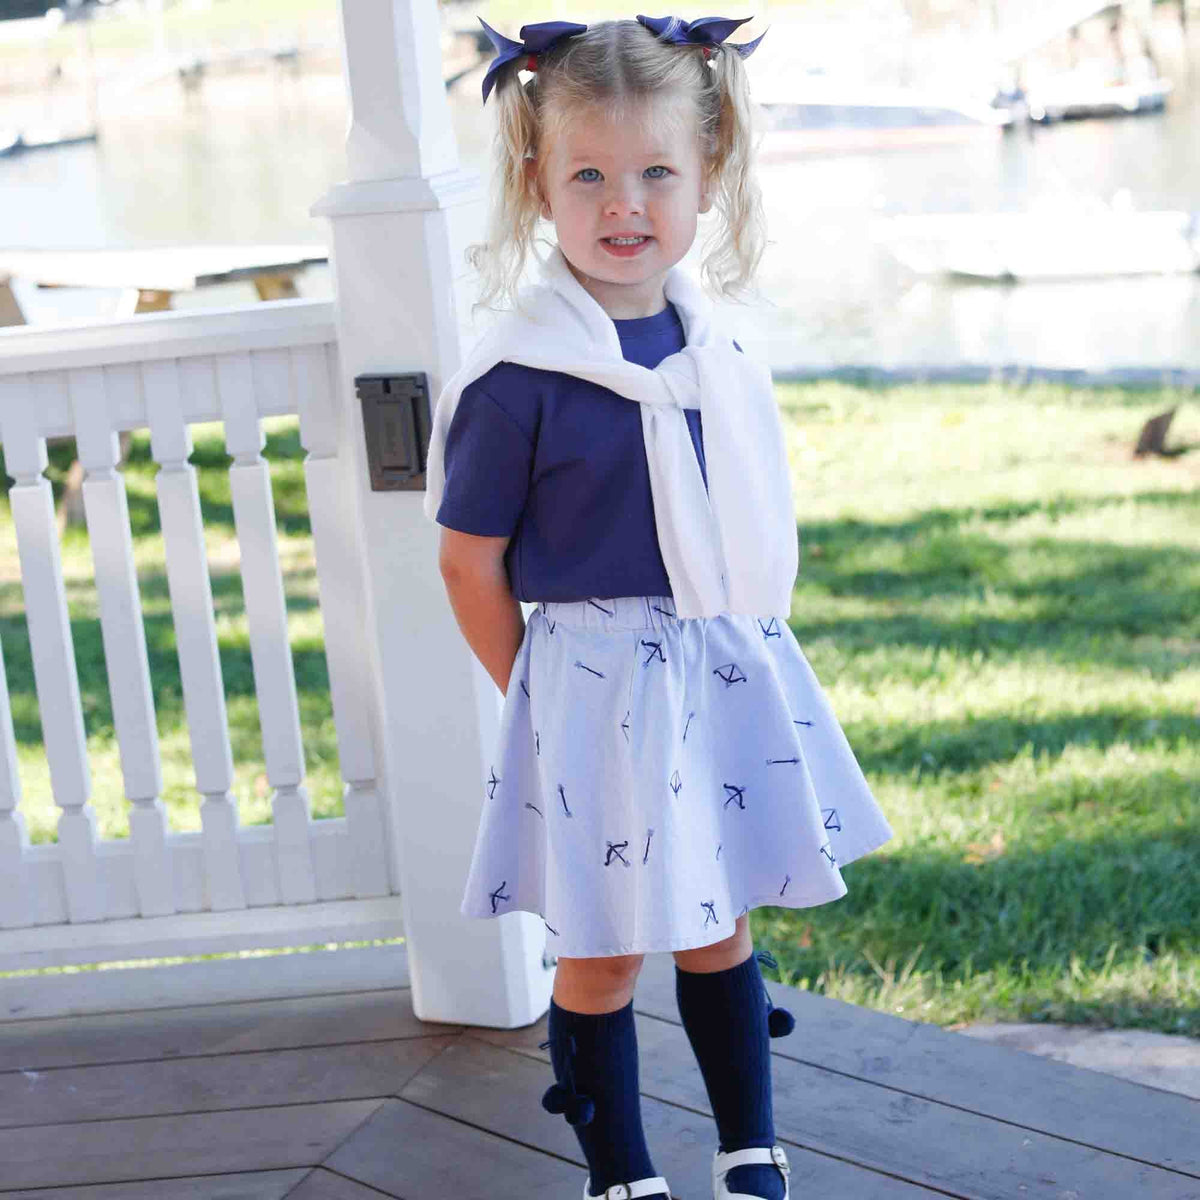 Classic and Preppy Heritage Grosgrain Bow Set-Accessory-Heritage-One-Size-CPC - Classic Prep Childrenswear